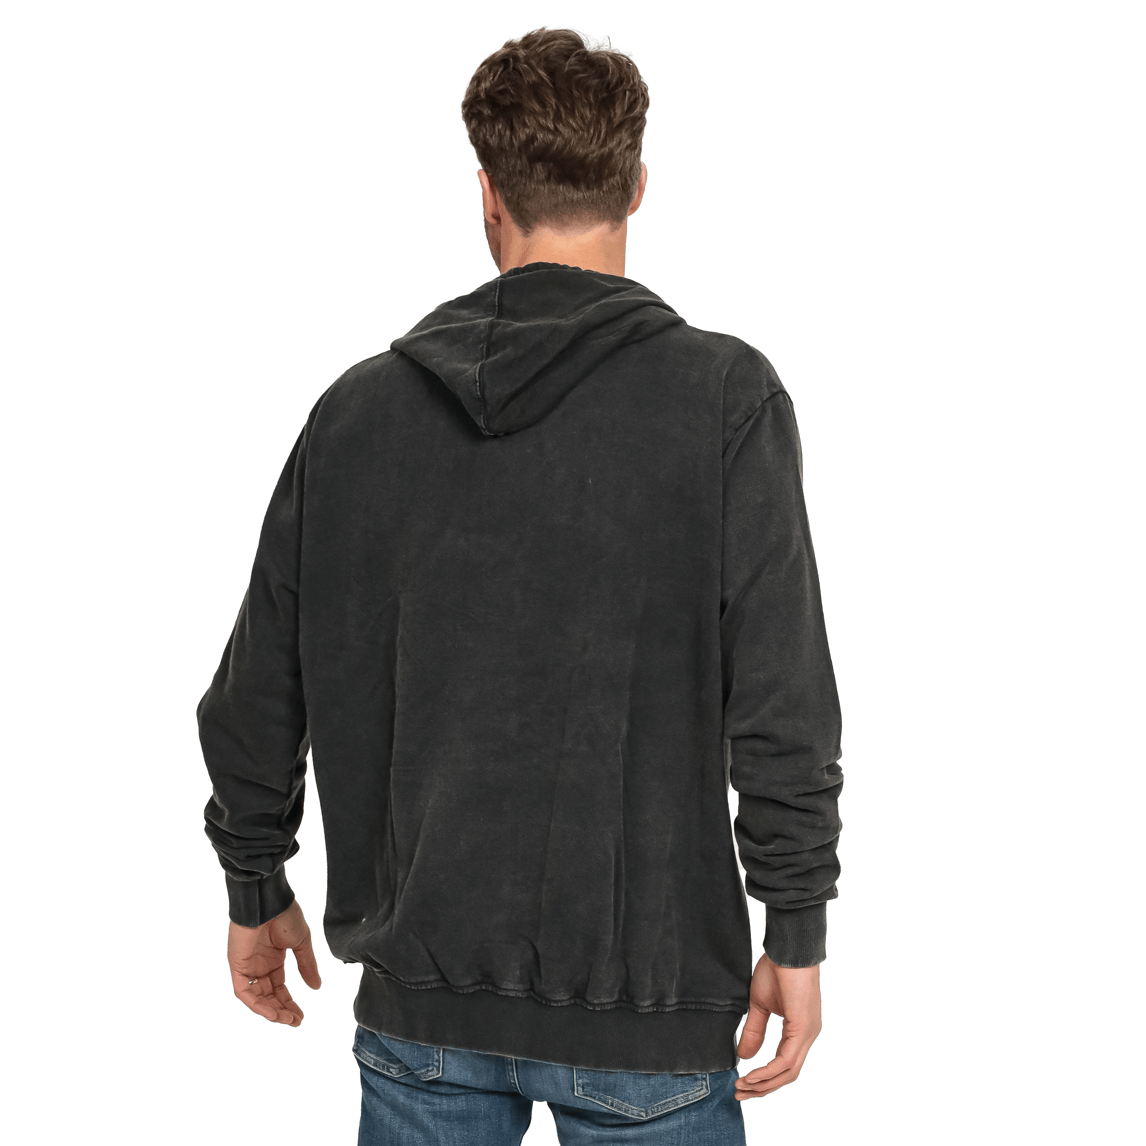 The back of a man wearing a black Guinness UK Harp Hoodie and jeans.